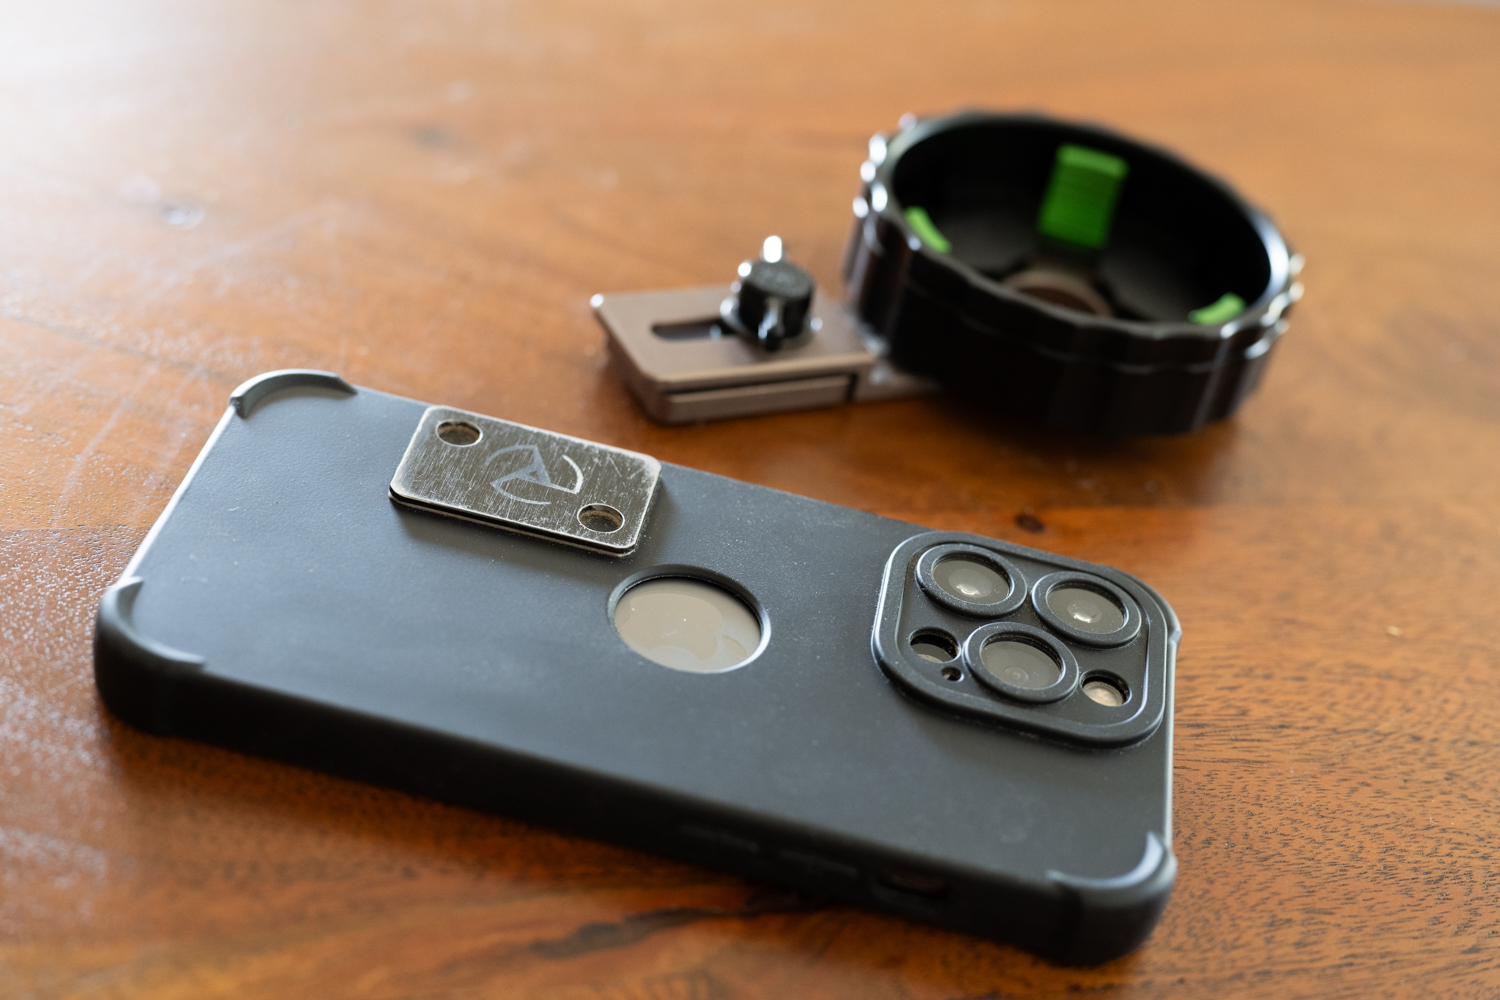 The ScopeCam Mag Plate design makes for convenient repeatable magnetic alignment with any phone case.